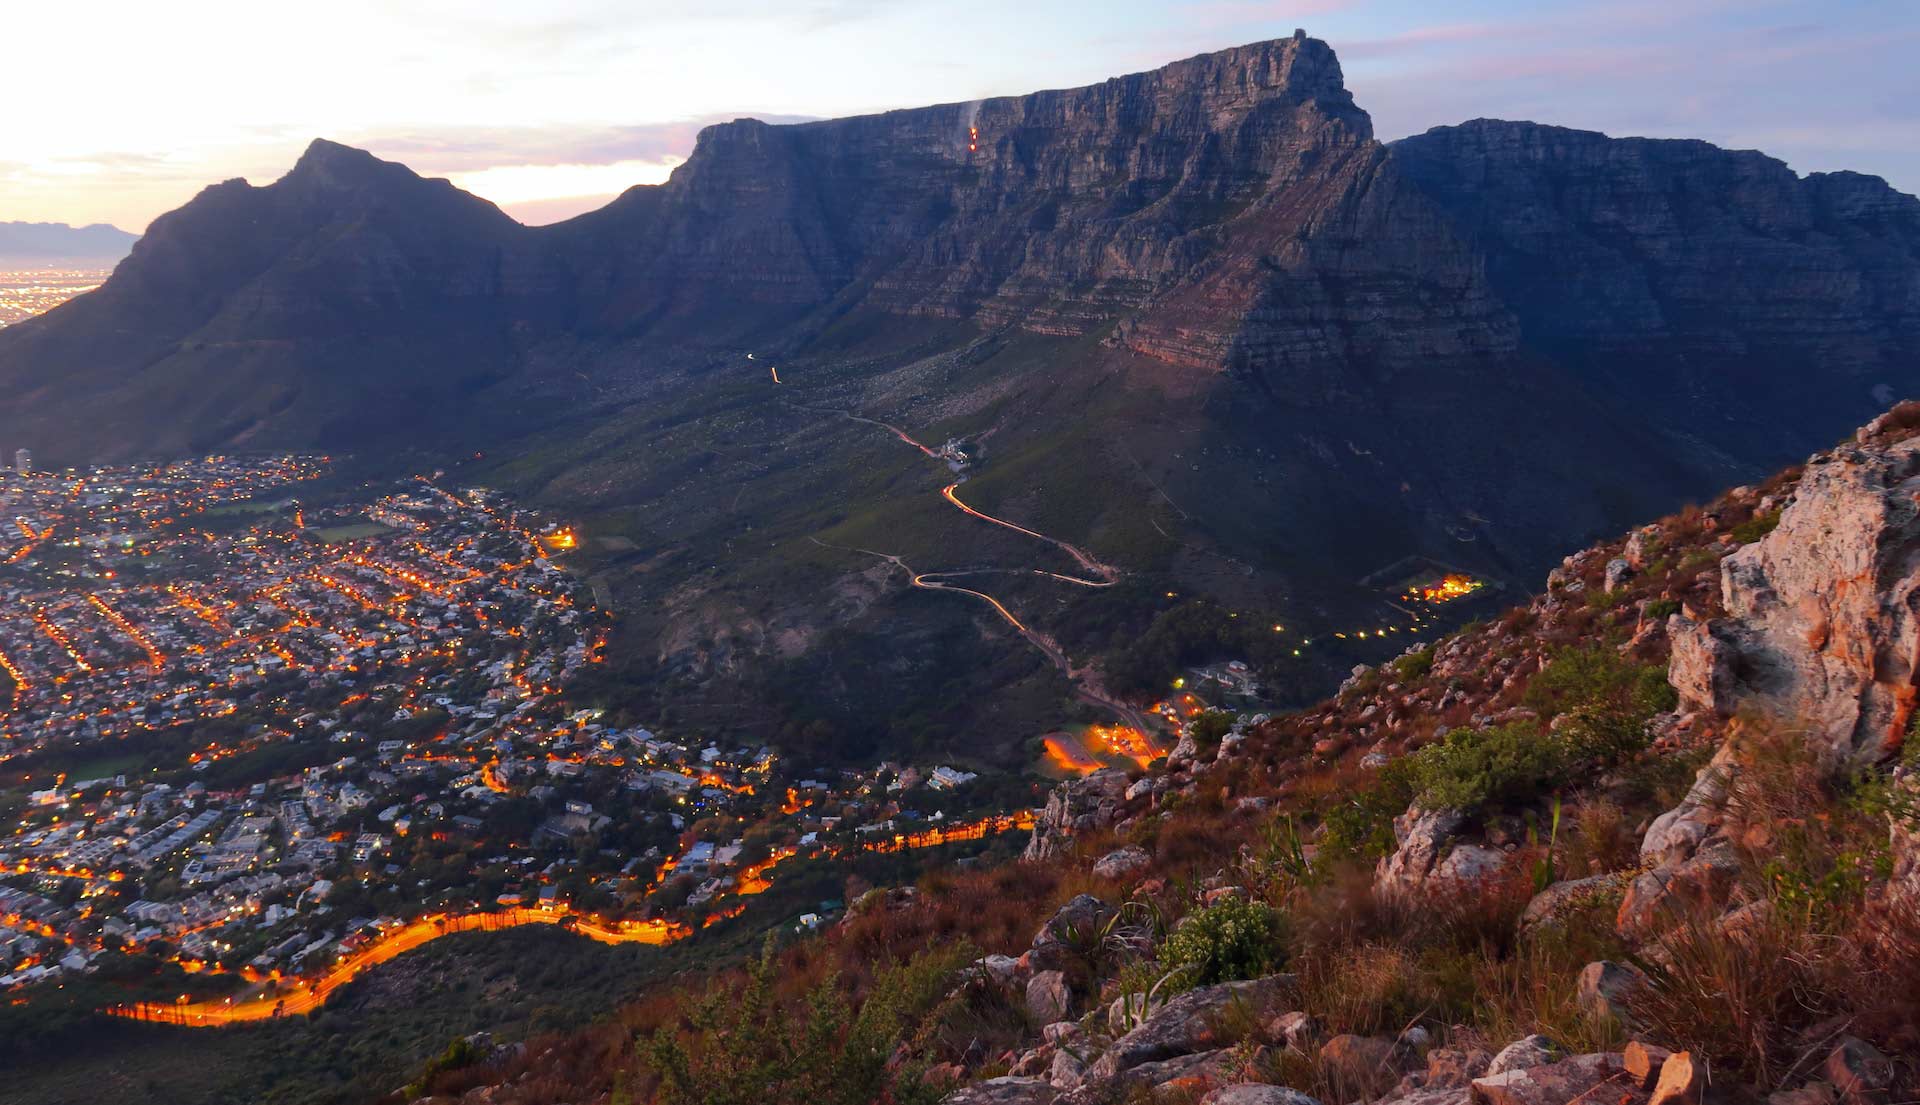 Views of Lionshead at night in Cape Town South Africa